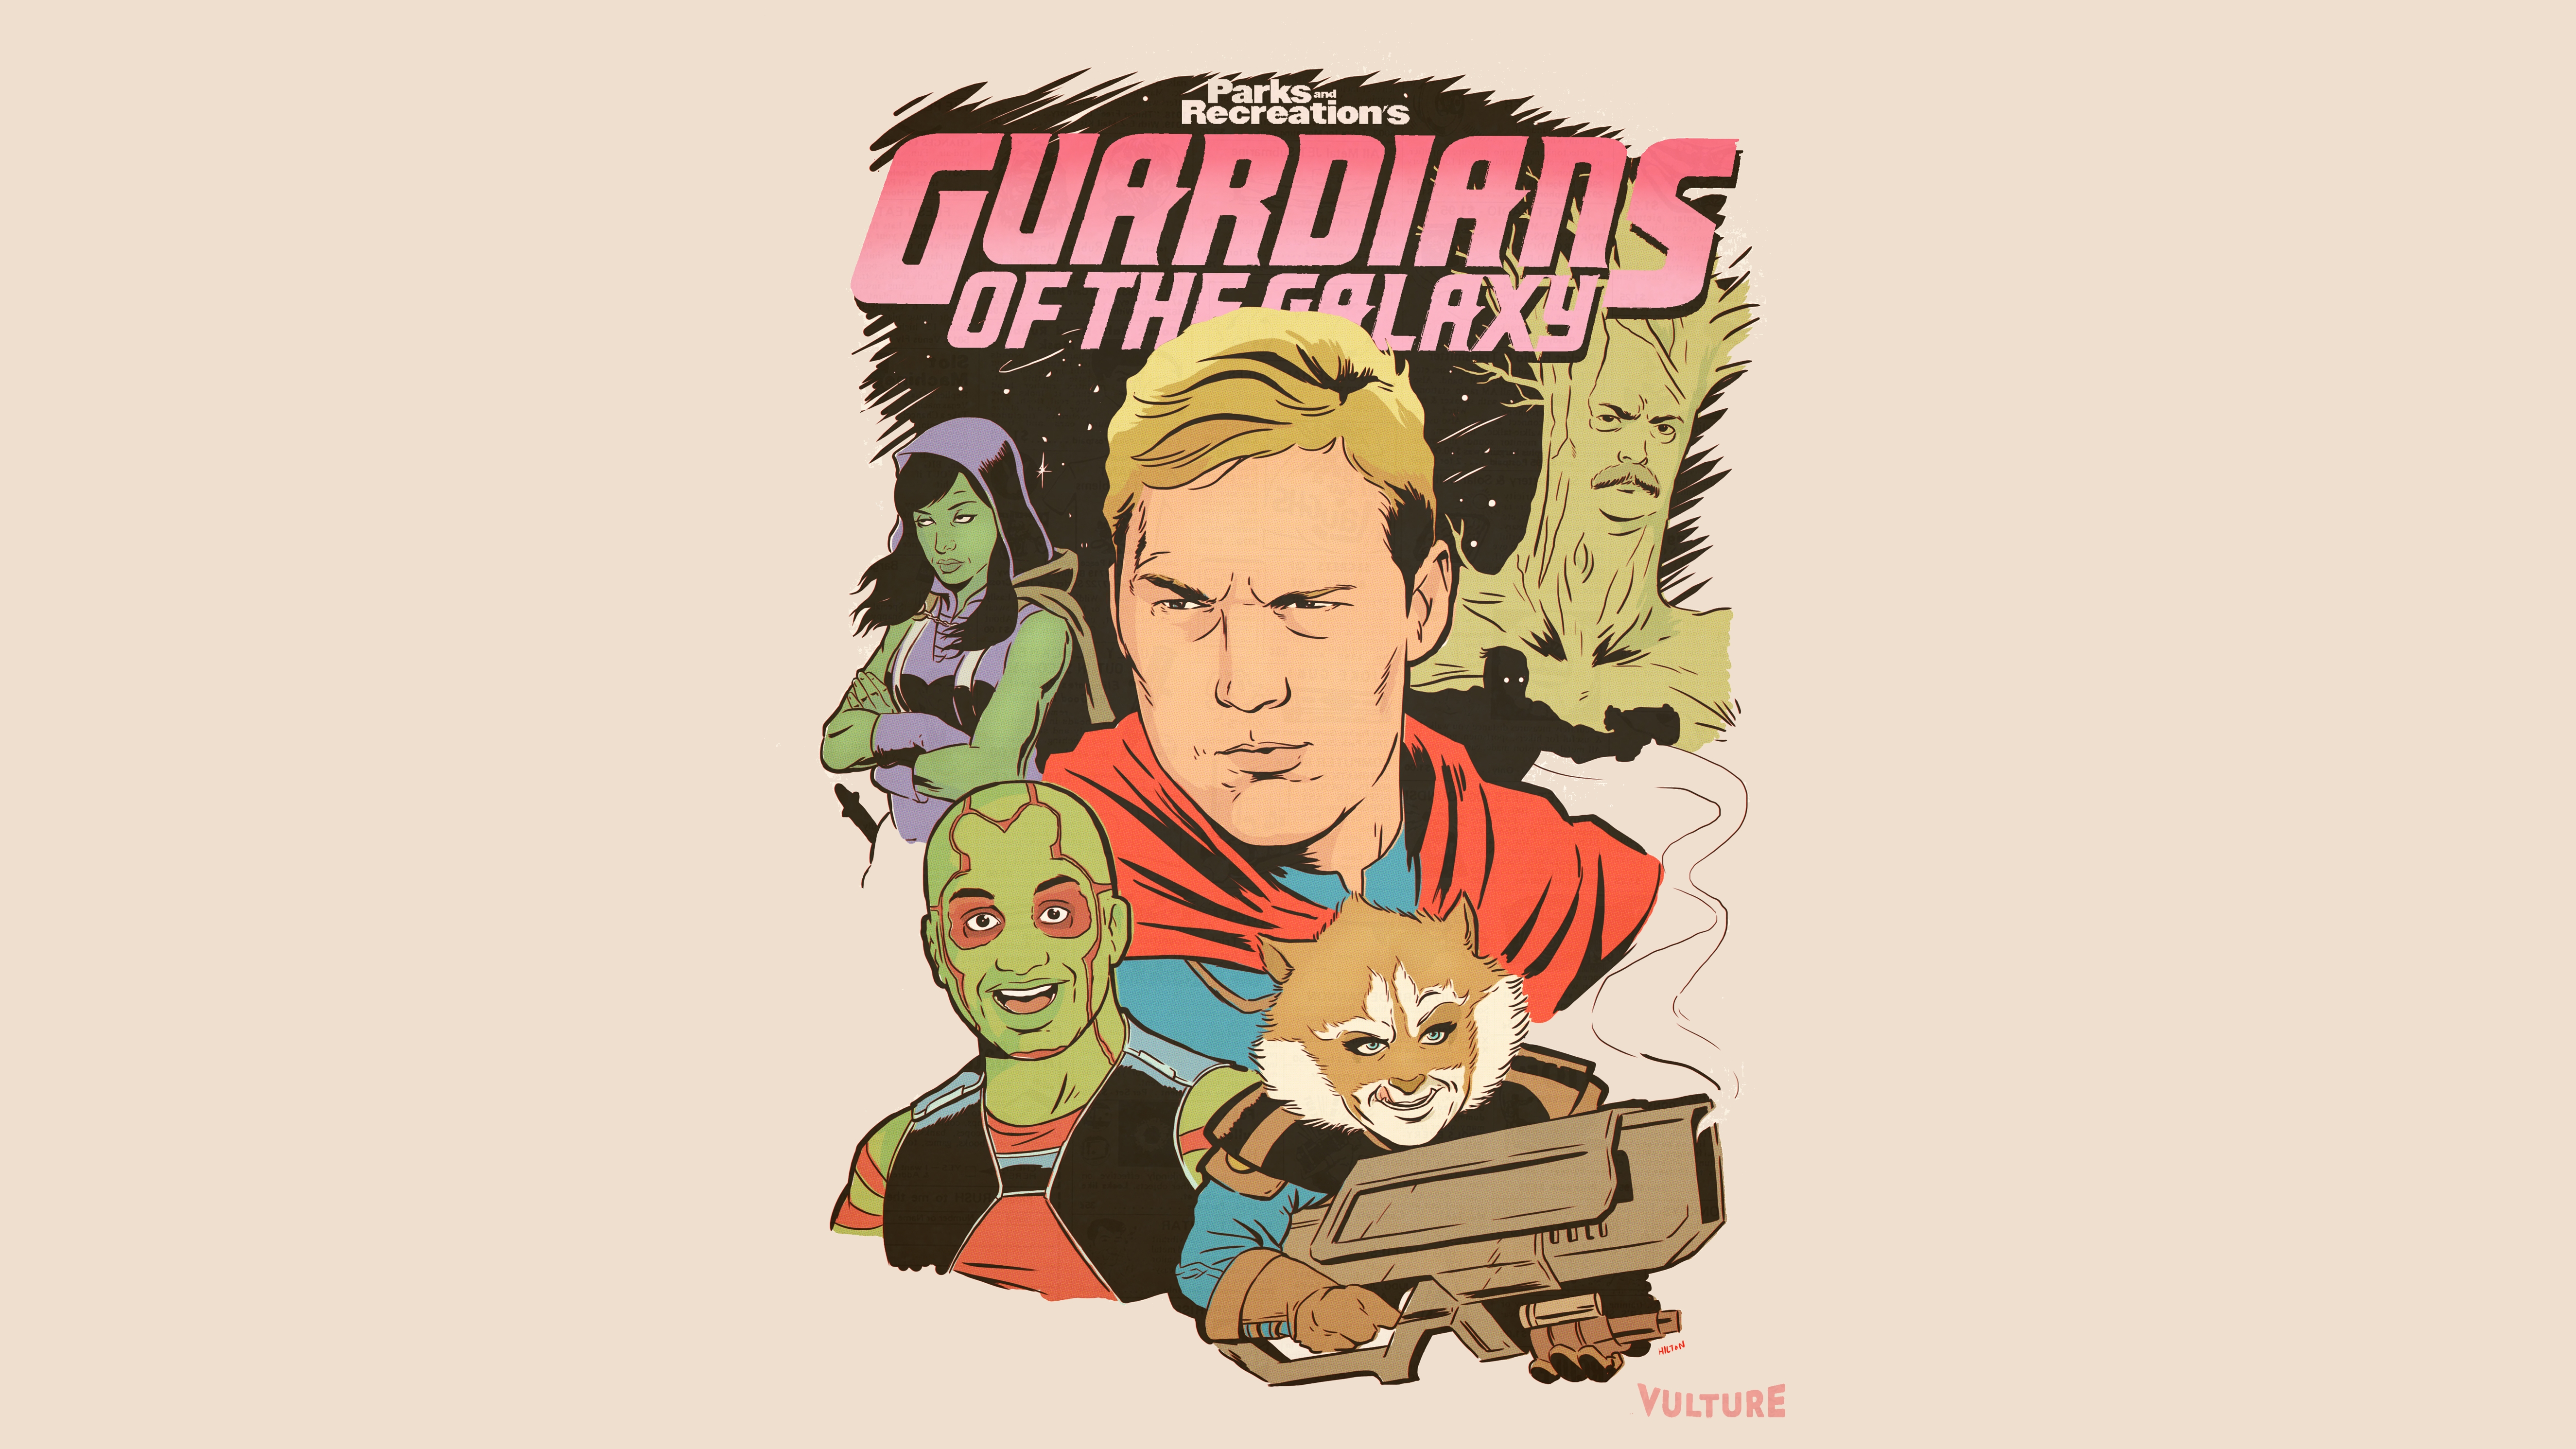 Comics Guardians Of The Galaxy HD Wallpaper | Background Image